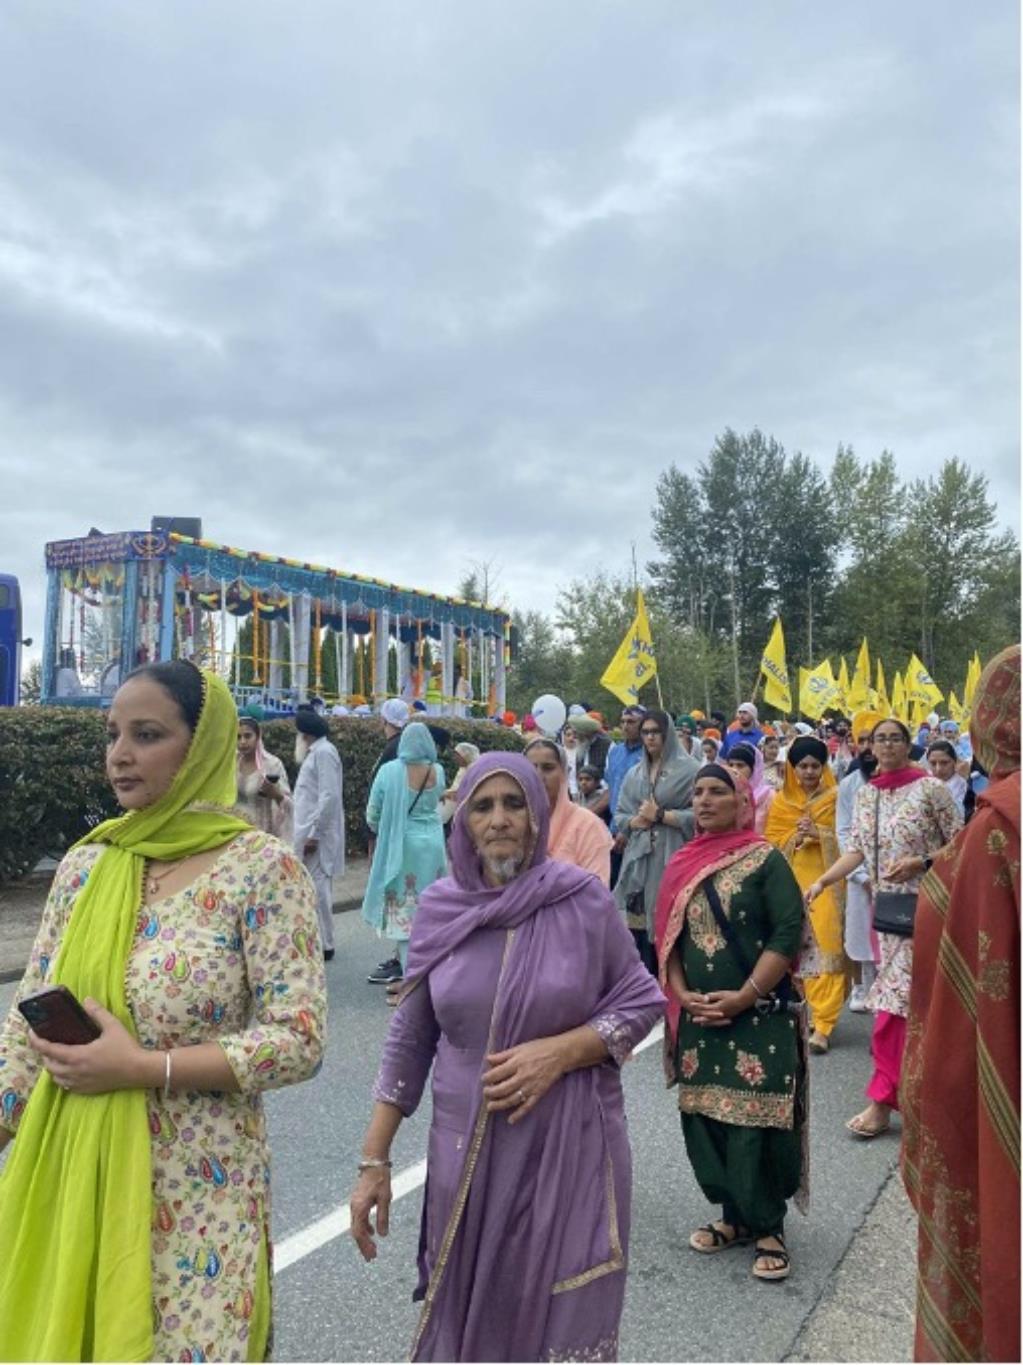 Nagar Kirtan Parade celebration. Many people are dressed in vibrant traditional outfits while some are marching with sikh flags